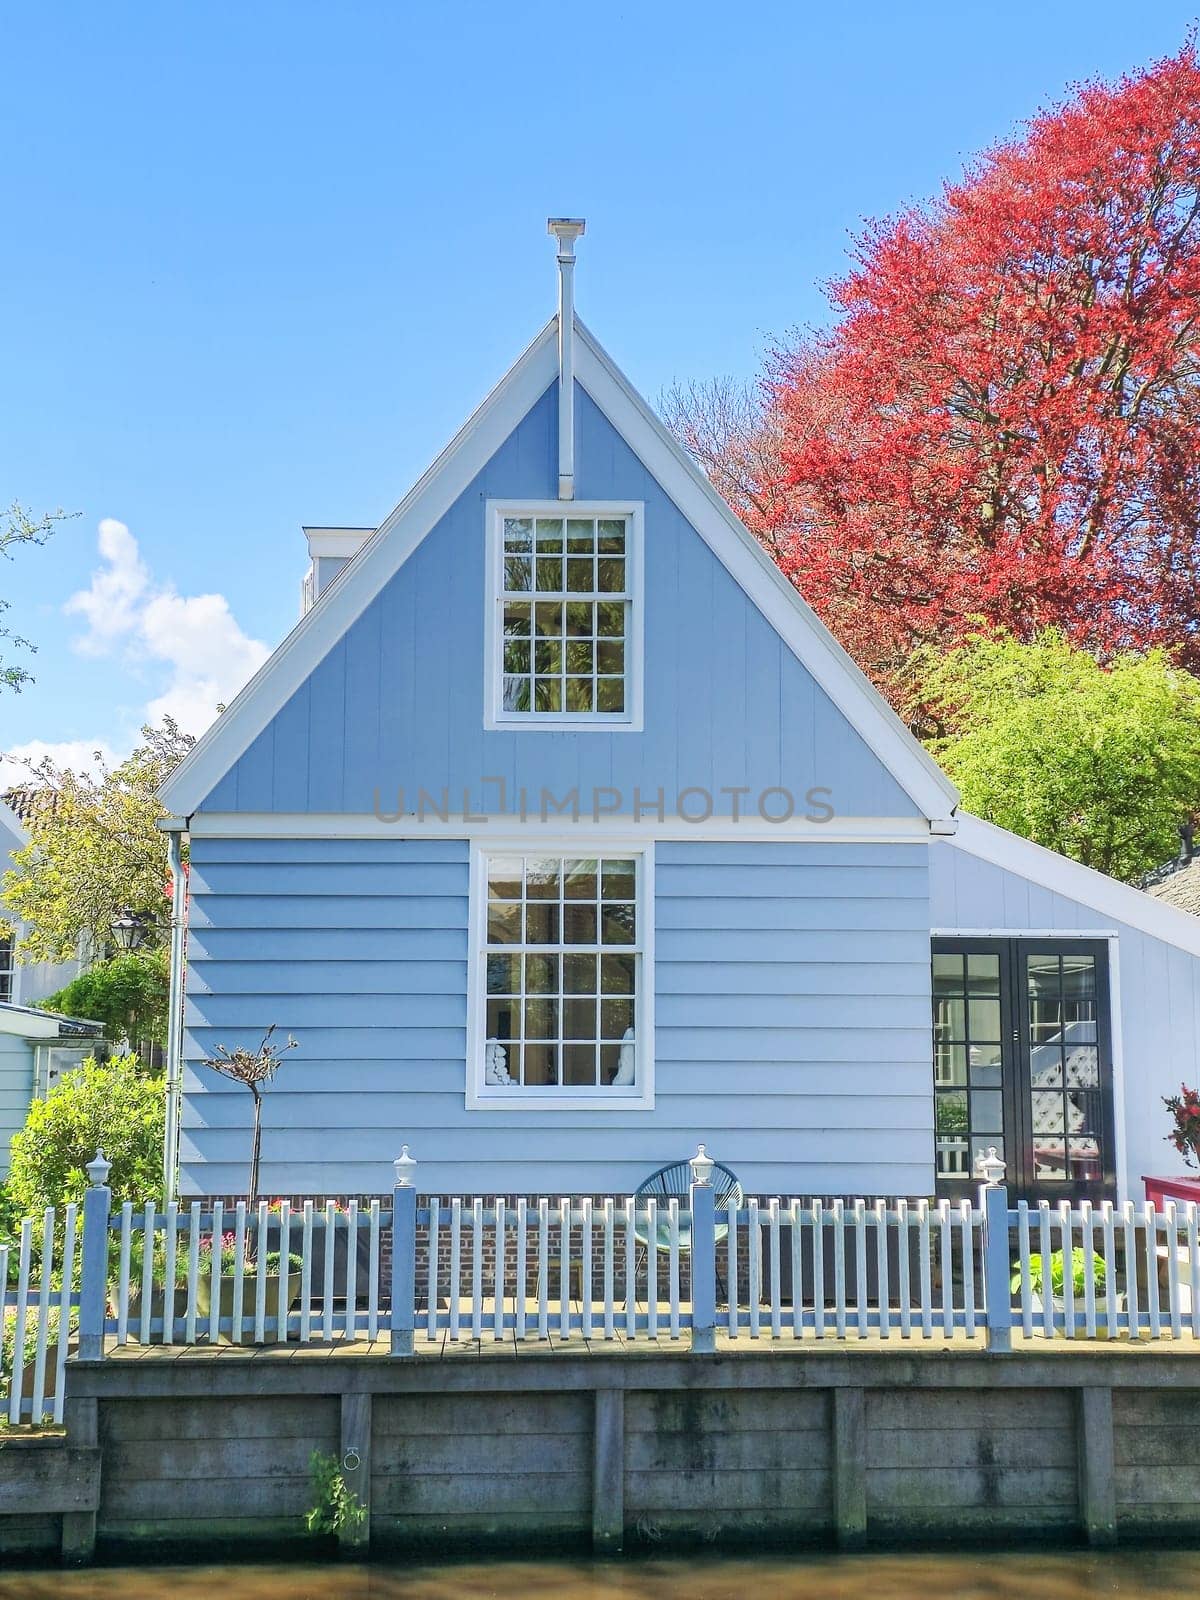 A charming blue house with a white picket fence nestled in a serene environment, exuding a sense of tranquility and nostalgia by fokkebok